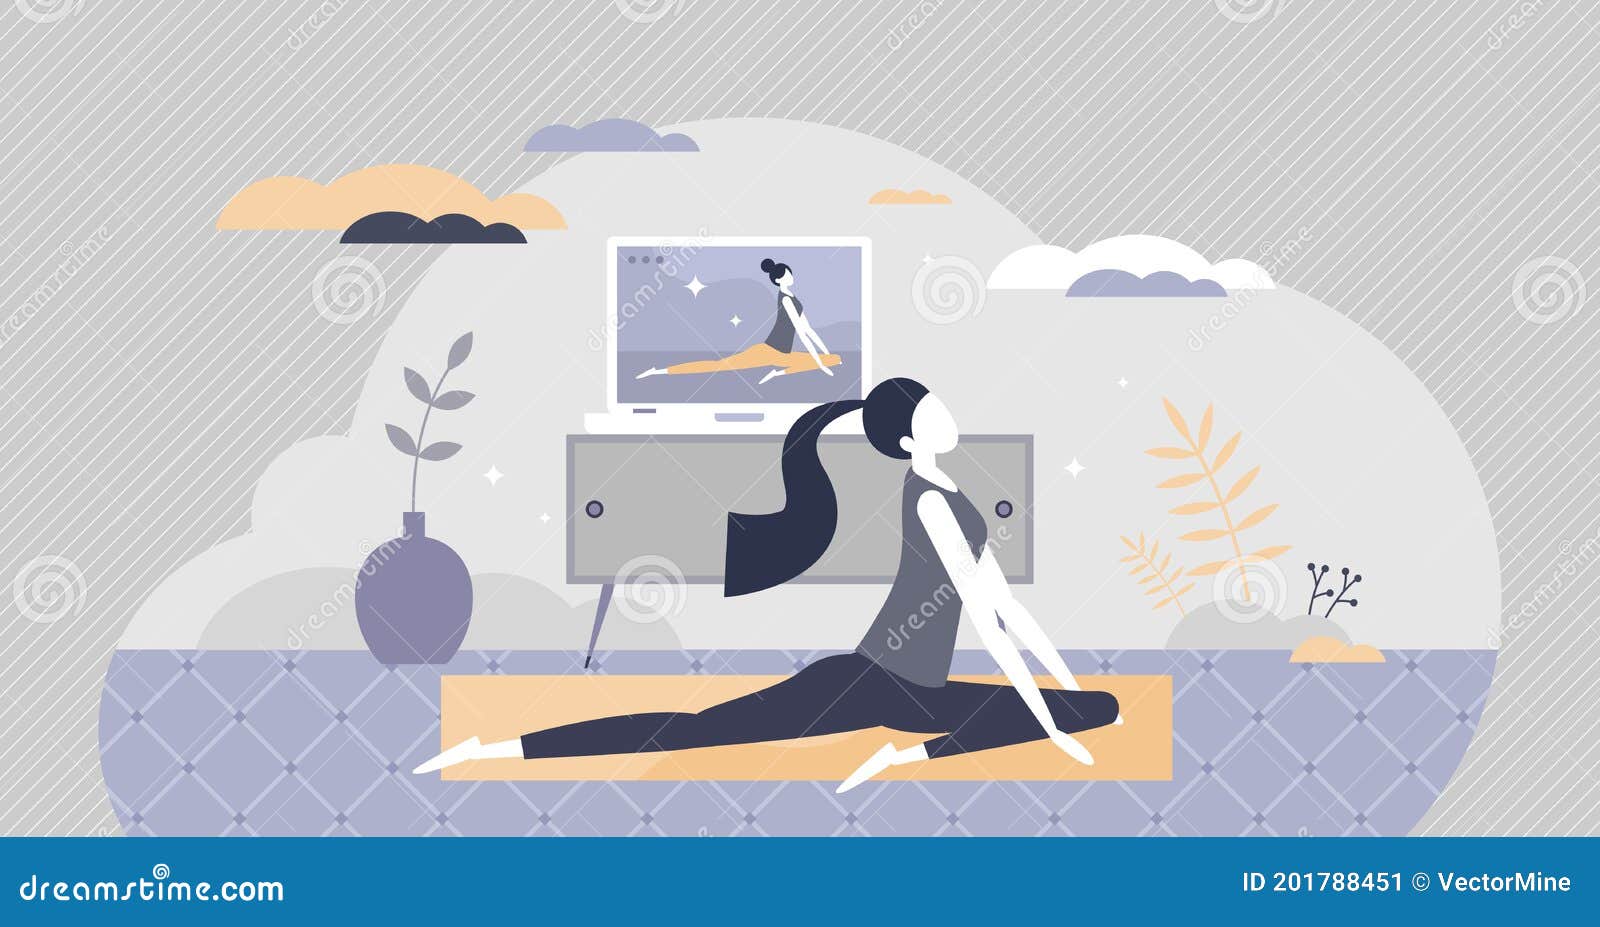 online yoga exercise with distant instructor training tiny person concept